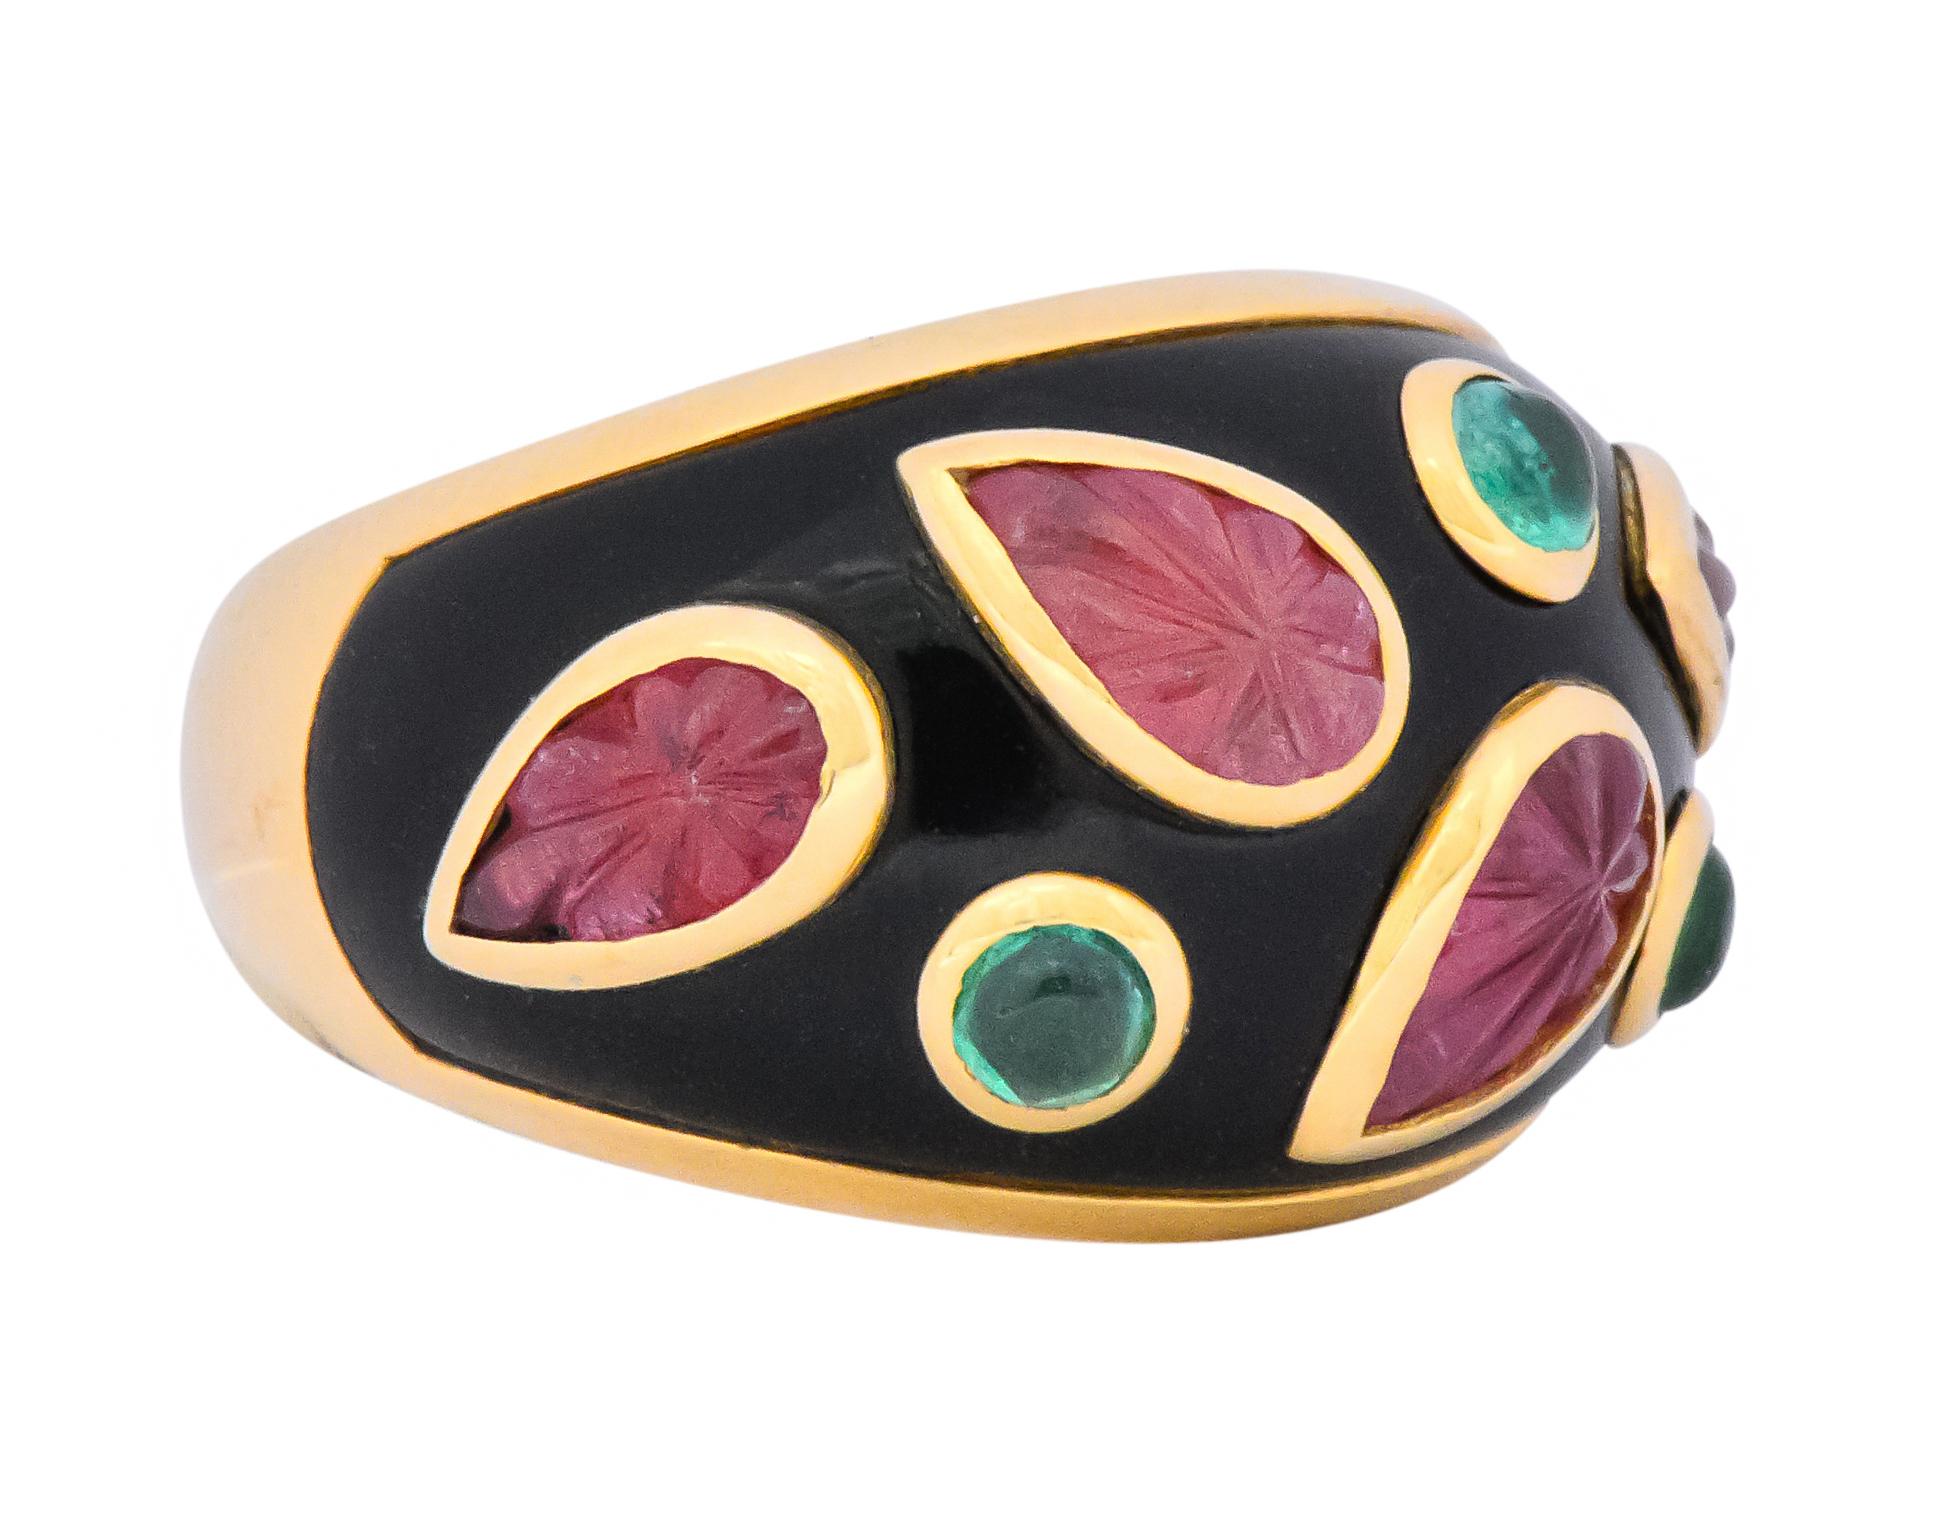 Set to the front with pink tourmaline carved leaves and round cabochon emeralds

All bezel set on a field of black lacquer 

Fully signed Cartier, stamped Cartier, 1991 partial number, 49, 750 for 18 karat gold and French assay marks

Ring Size: 5